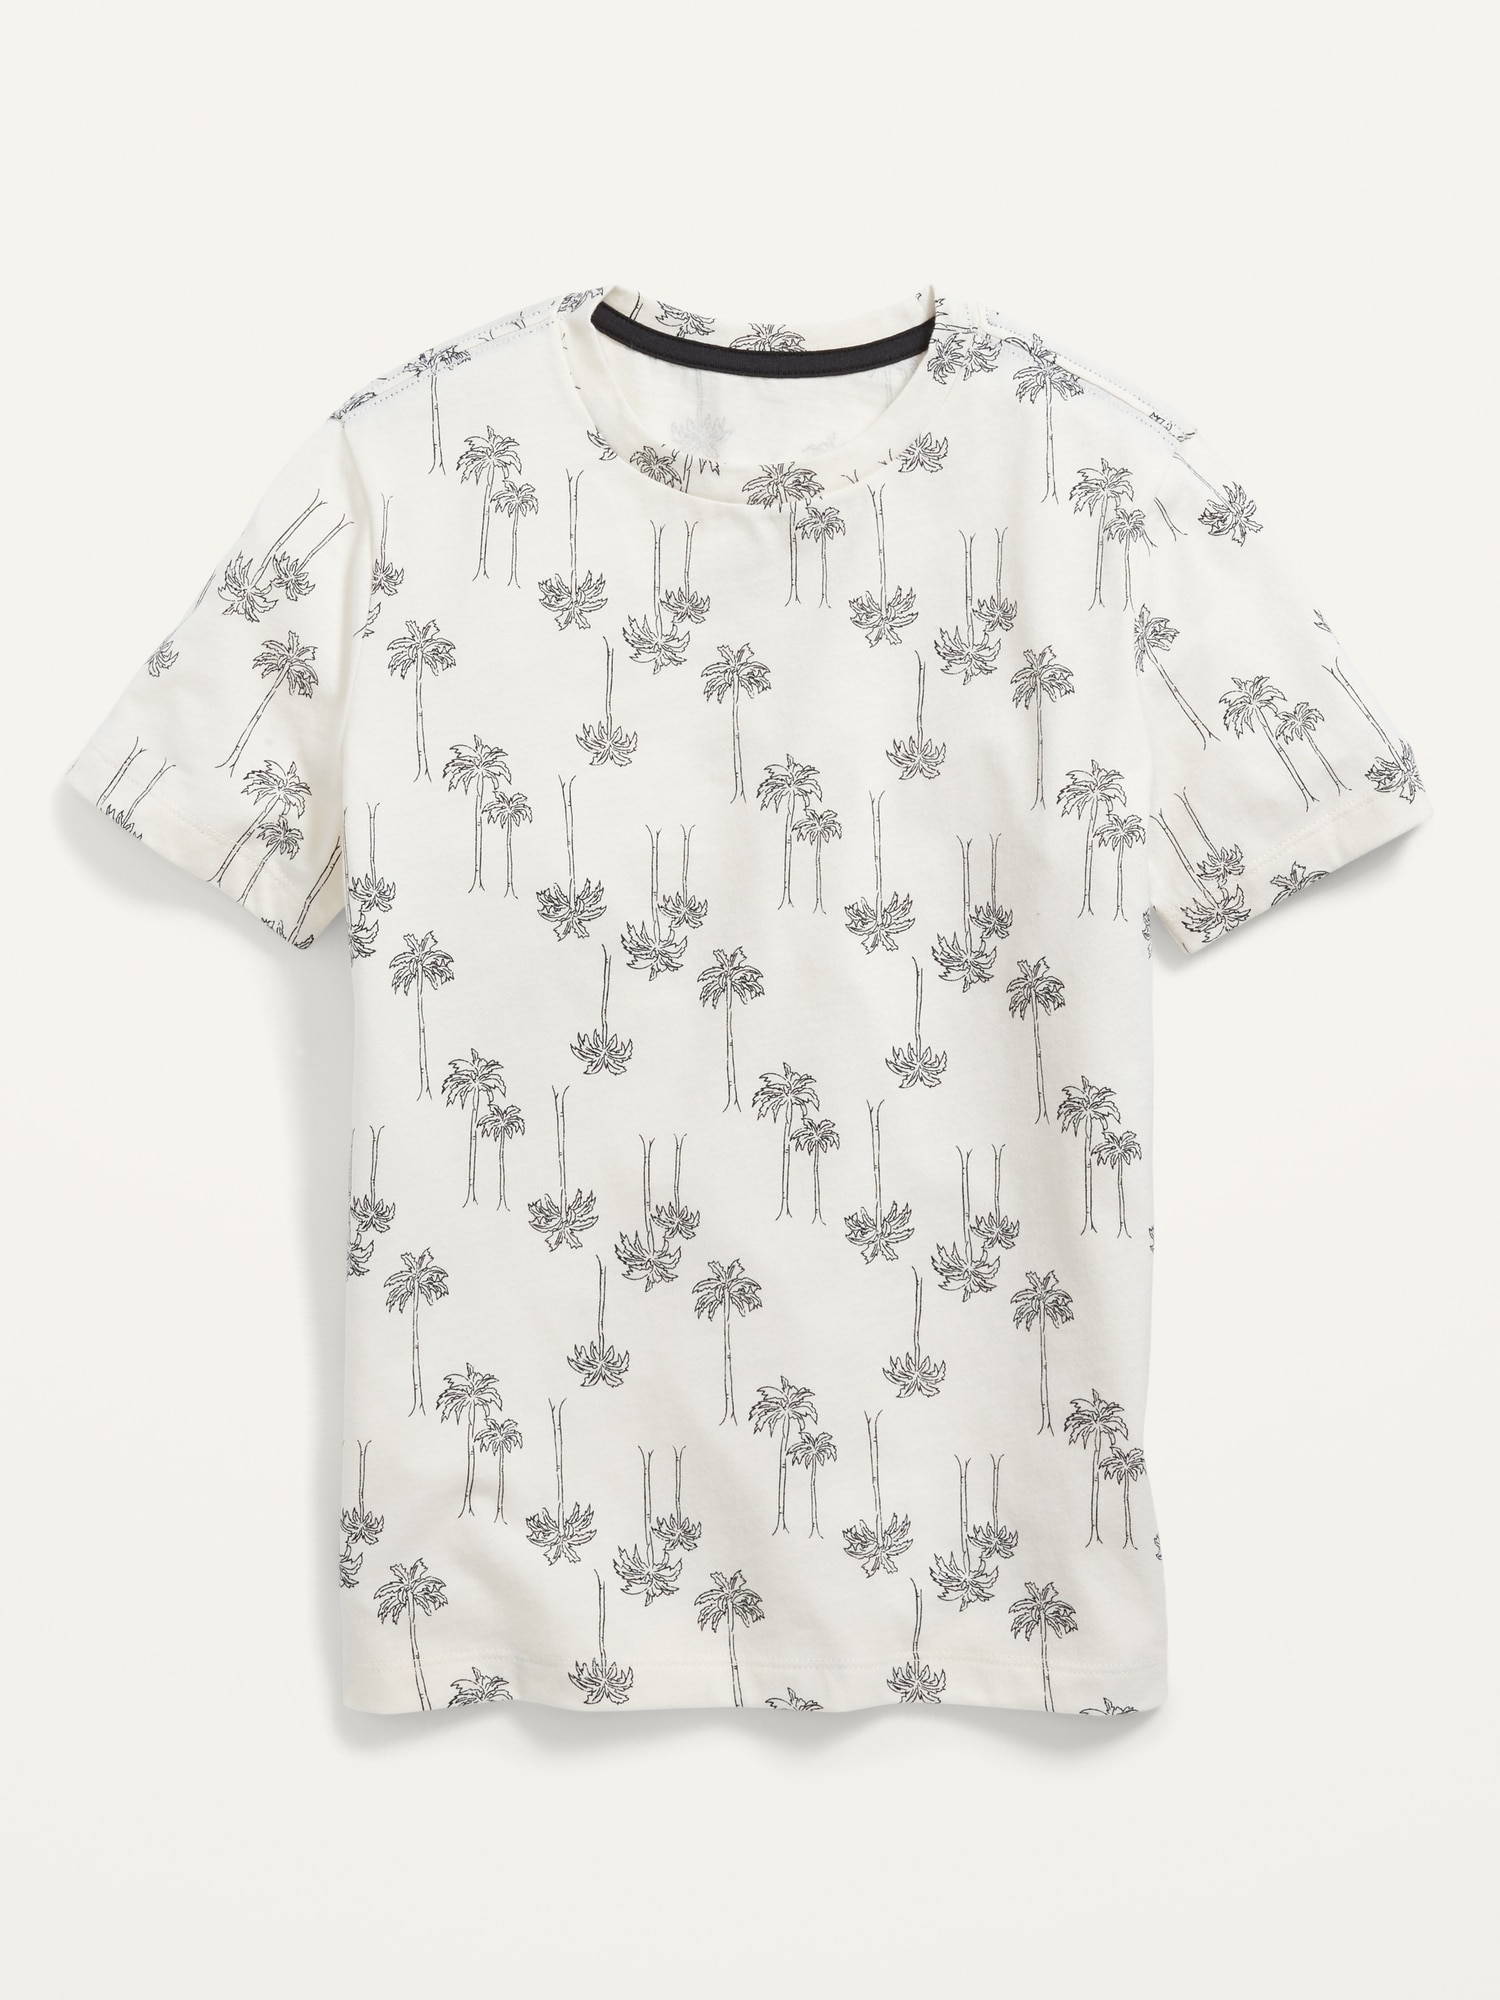 Softest Short-Sleeve Printed T-Shirt For Boys | Old Navy